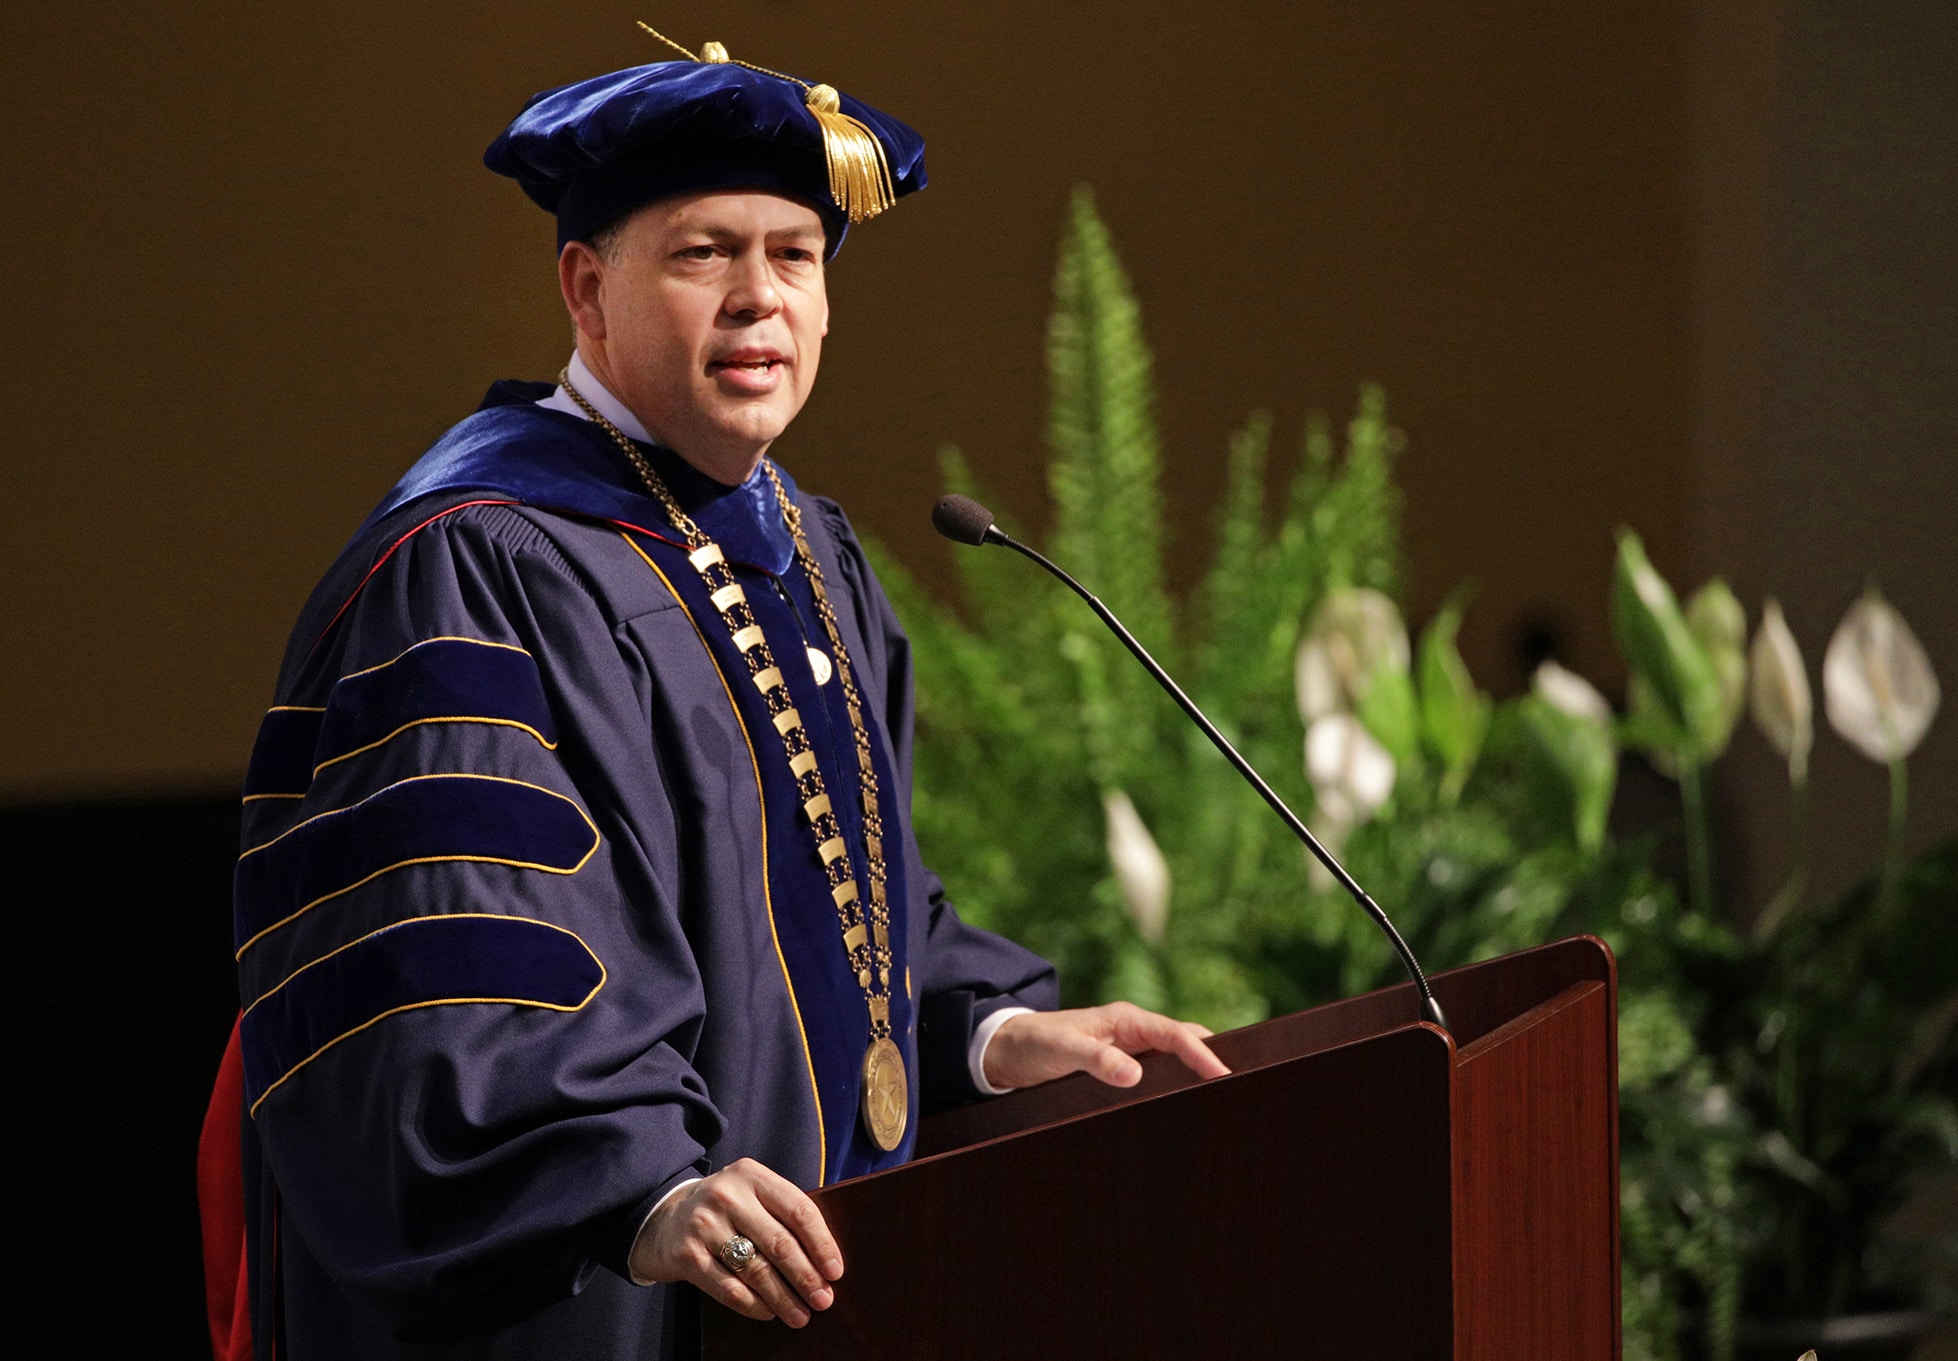 Dr. Hines speaks at Commencement